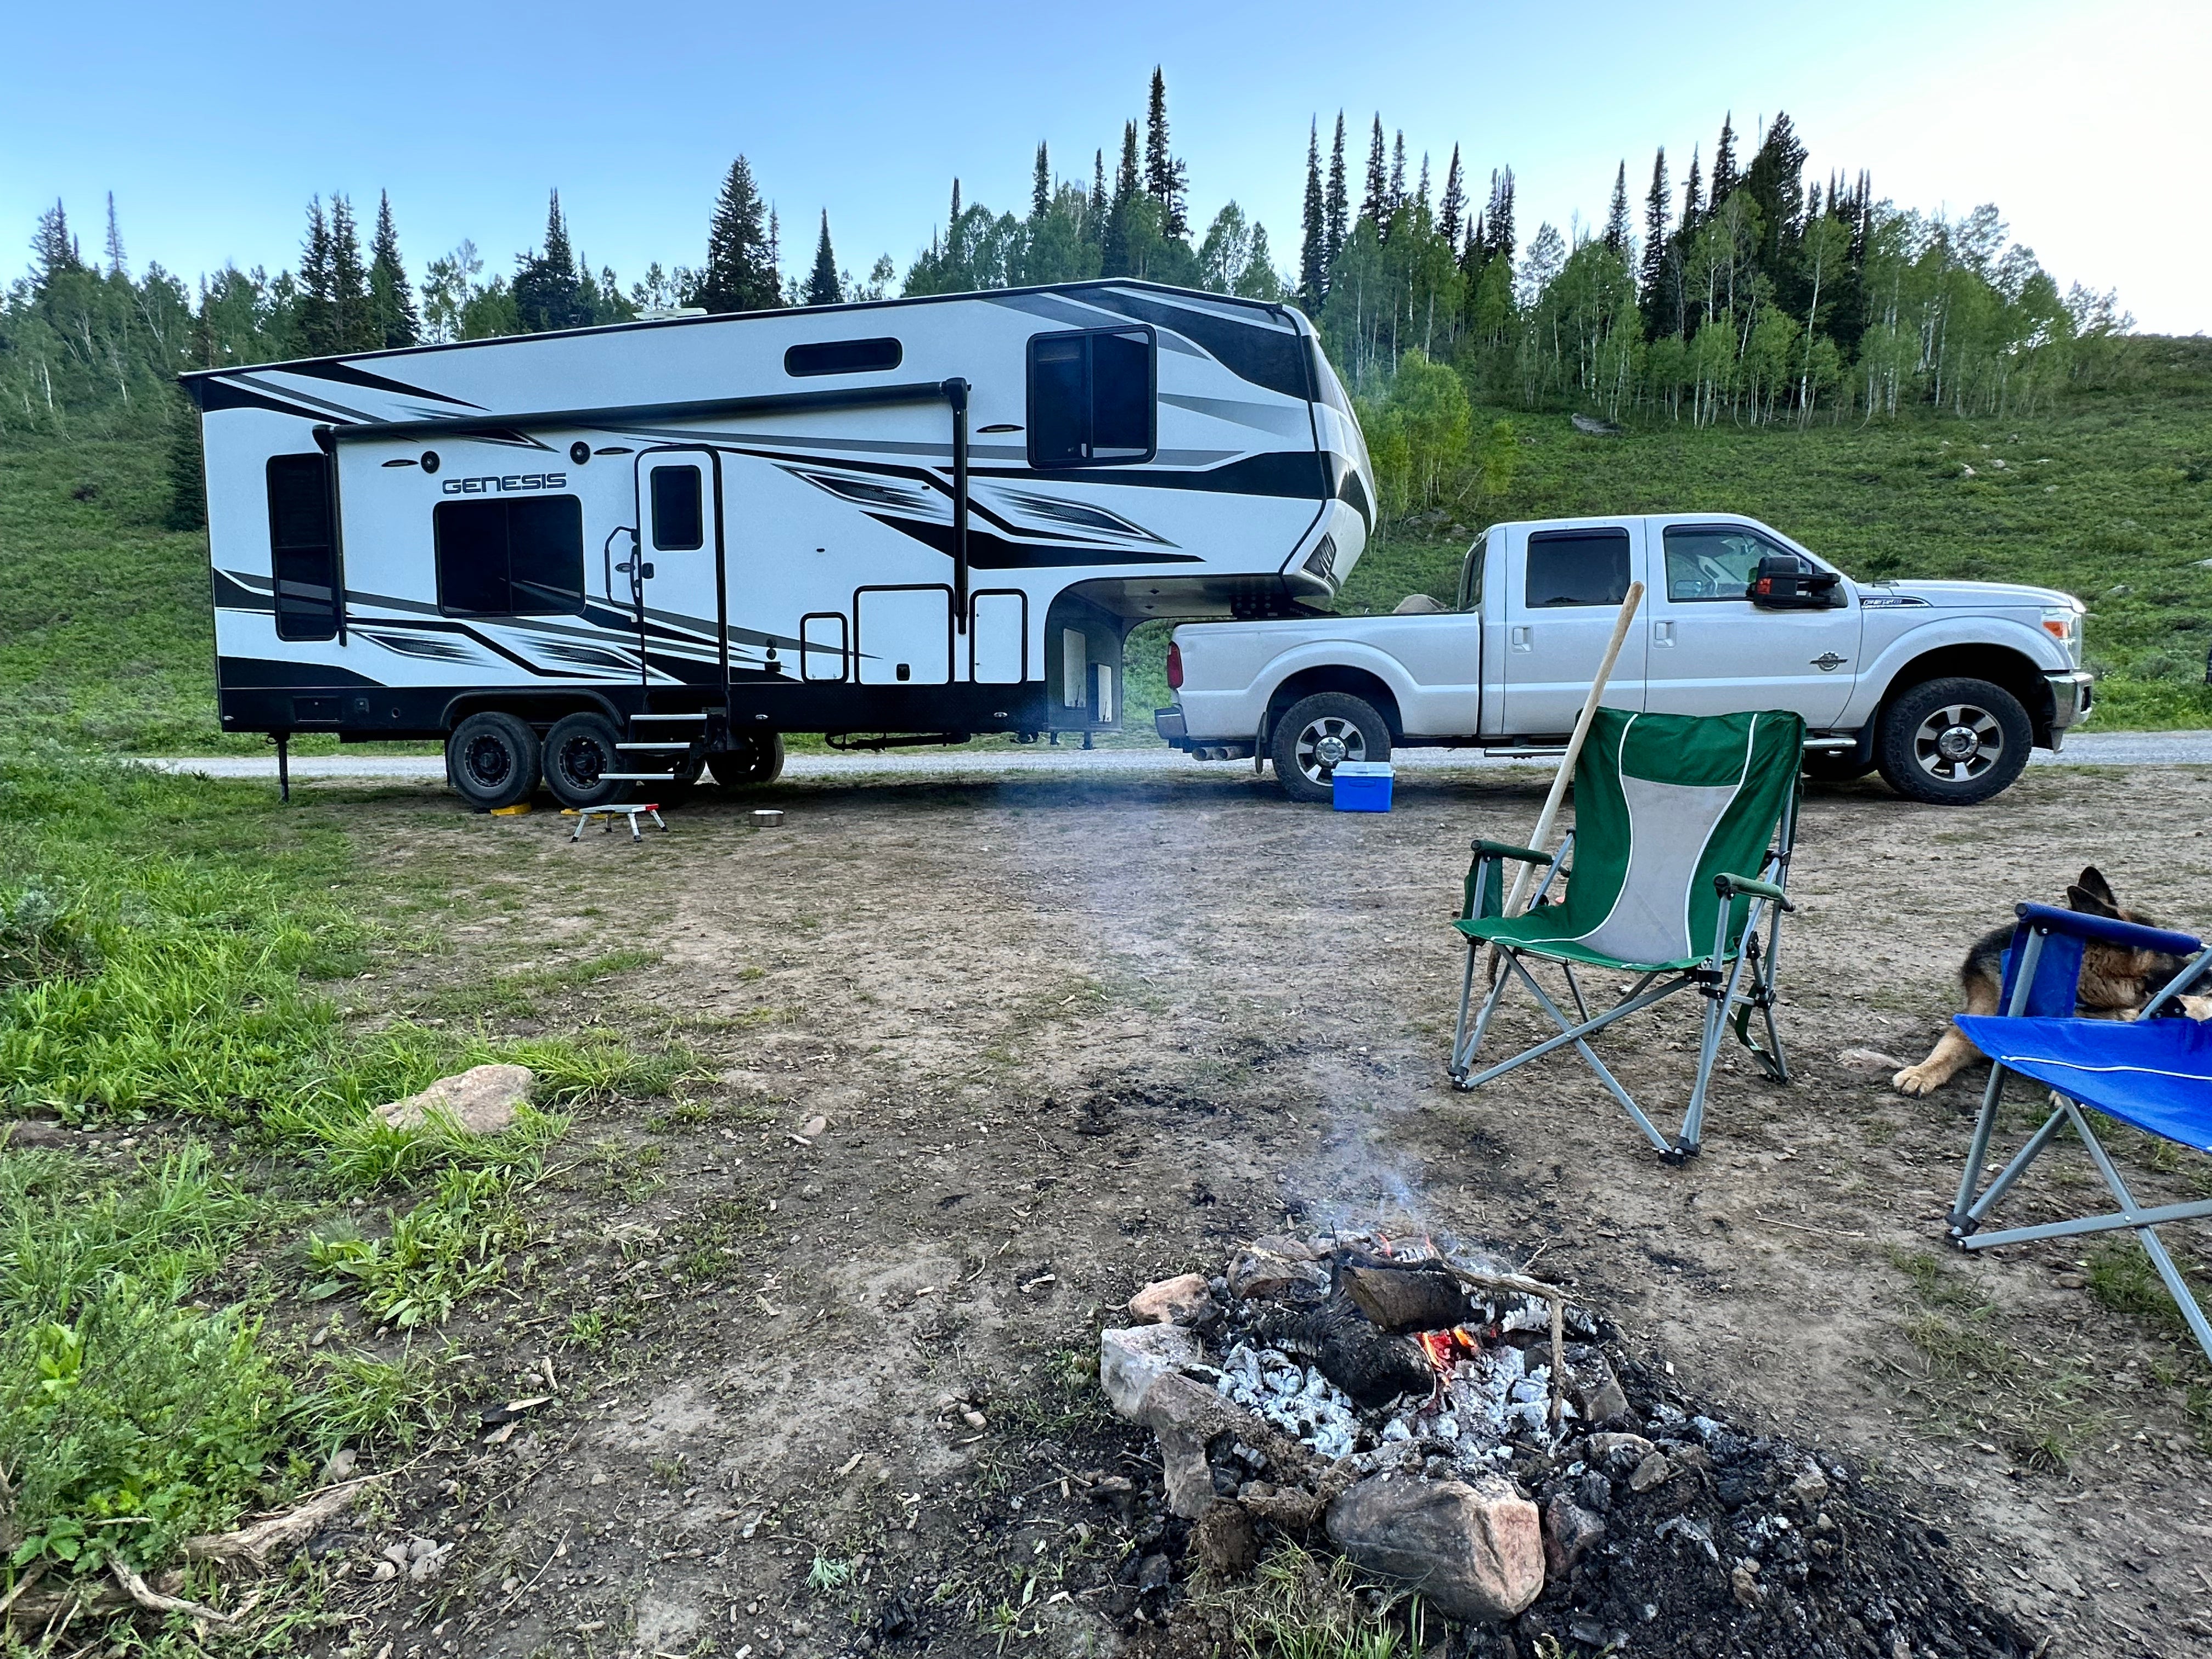 Camper submitted image from Franklin Basin Dispersed Camping - 1